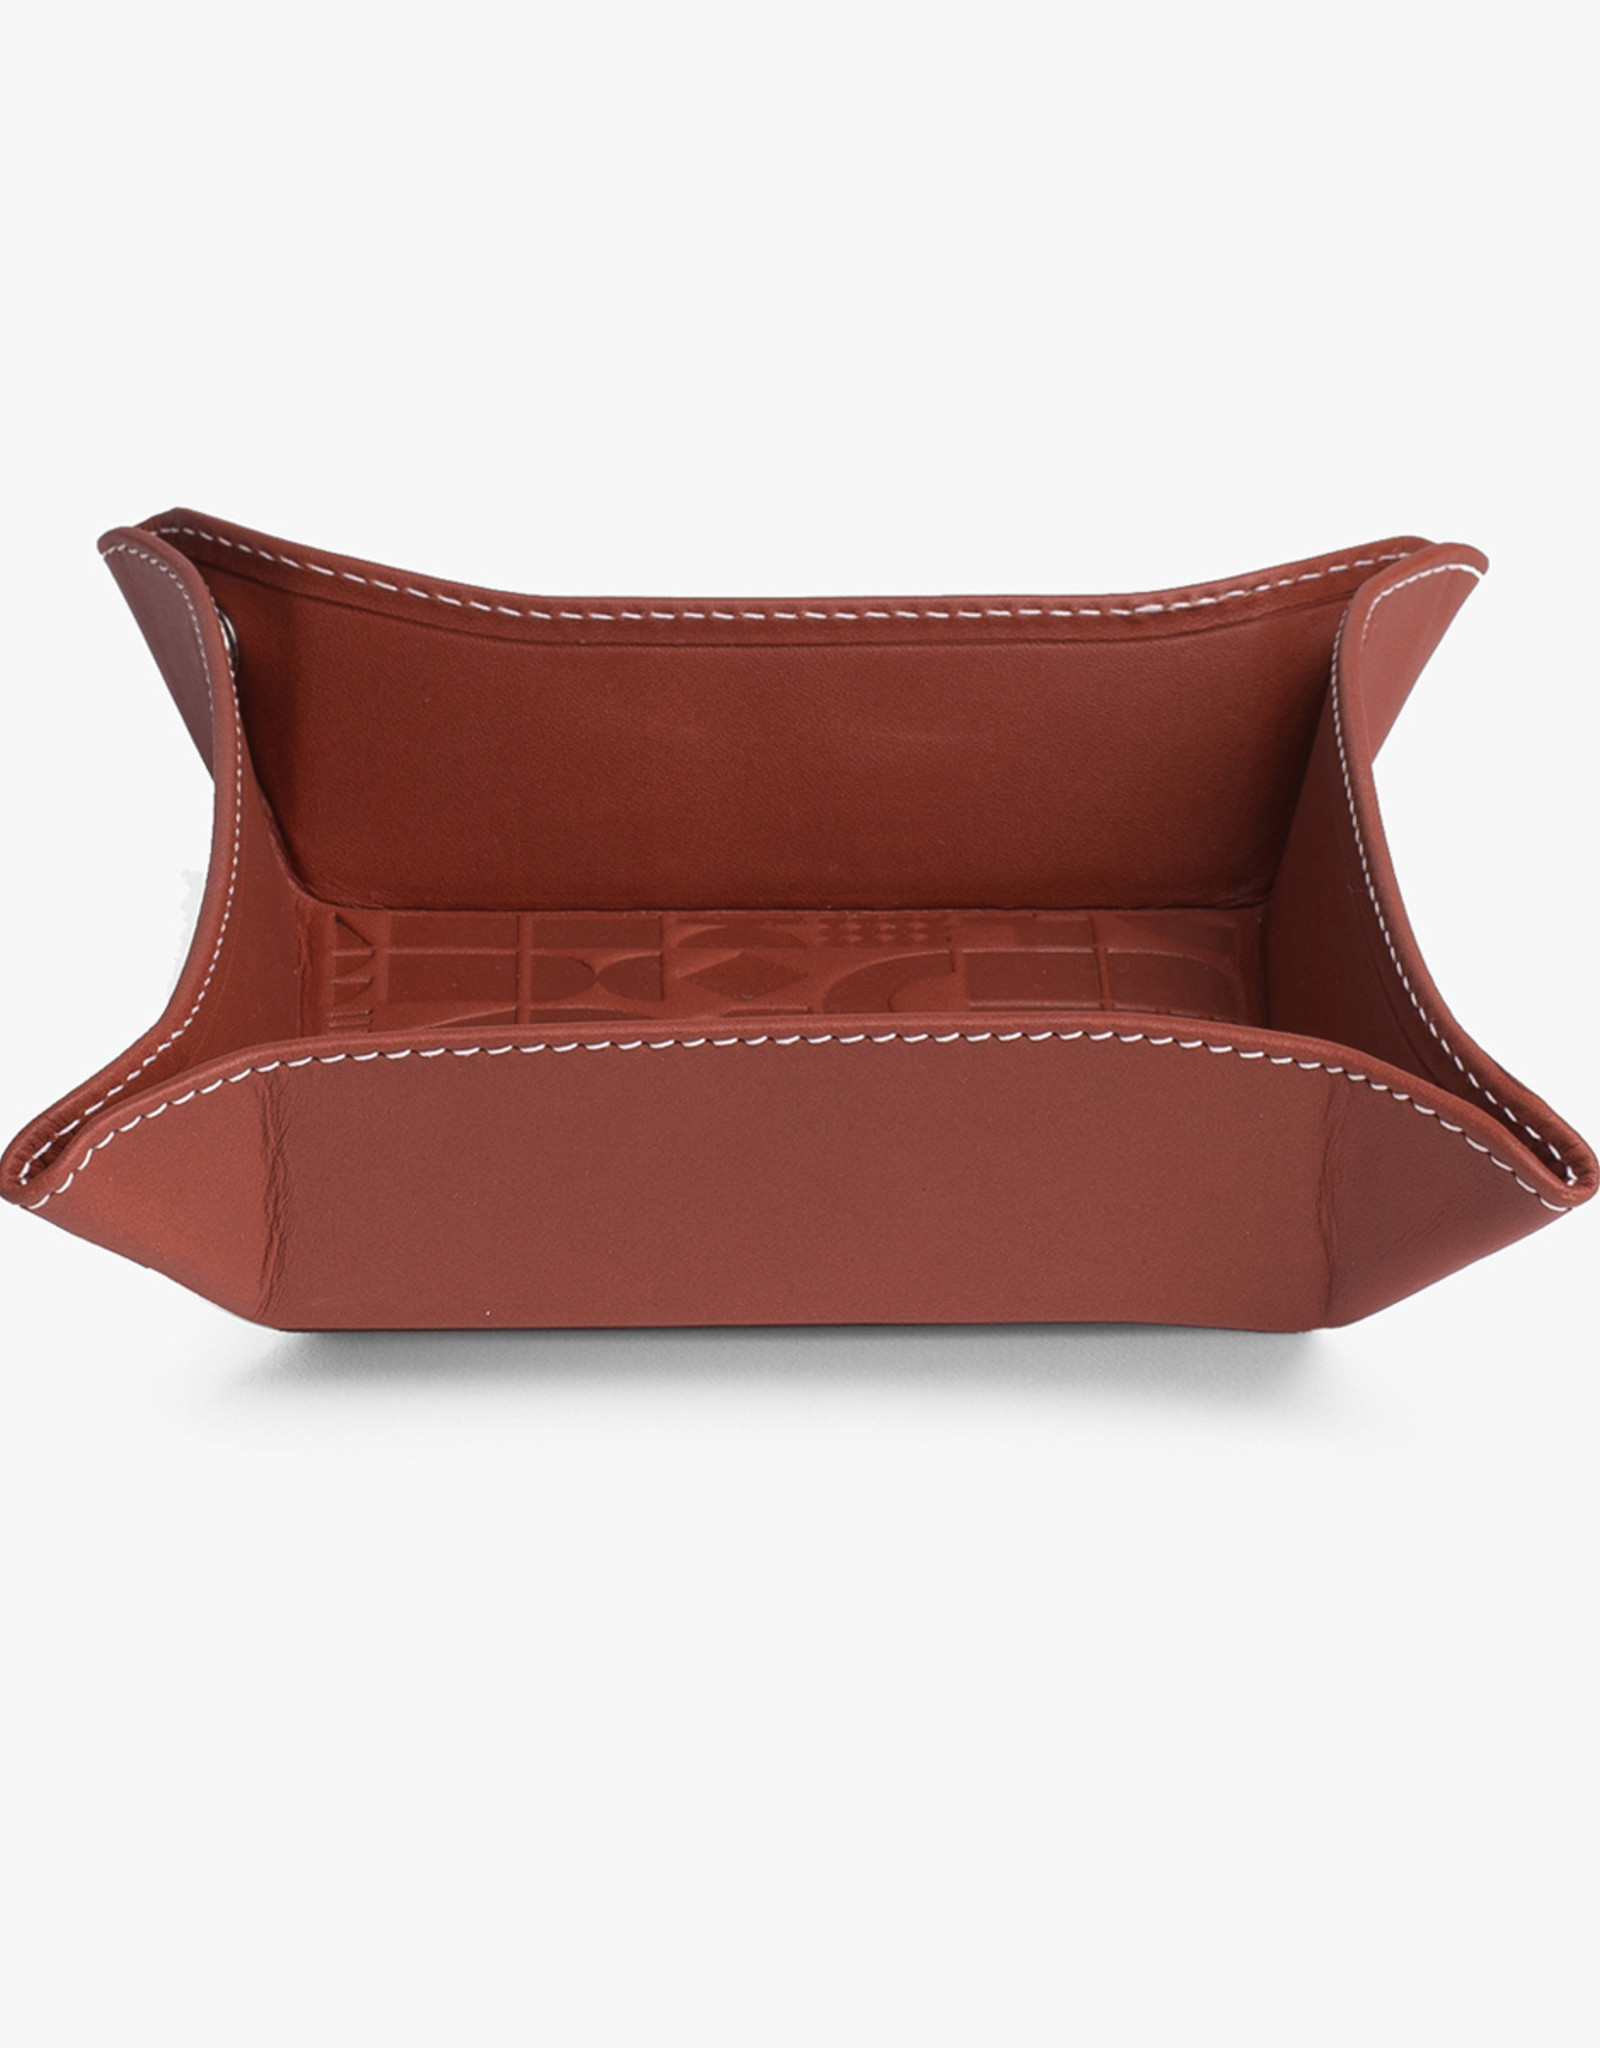 Medium Embossed Tray by Carl Cavallius for Palmgrens | Cognac leather